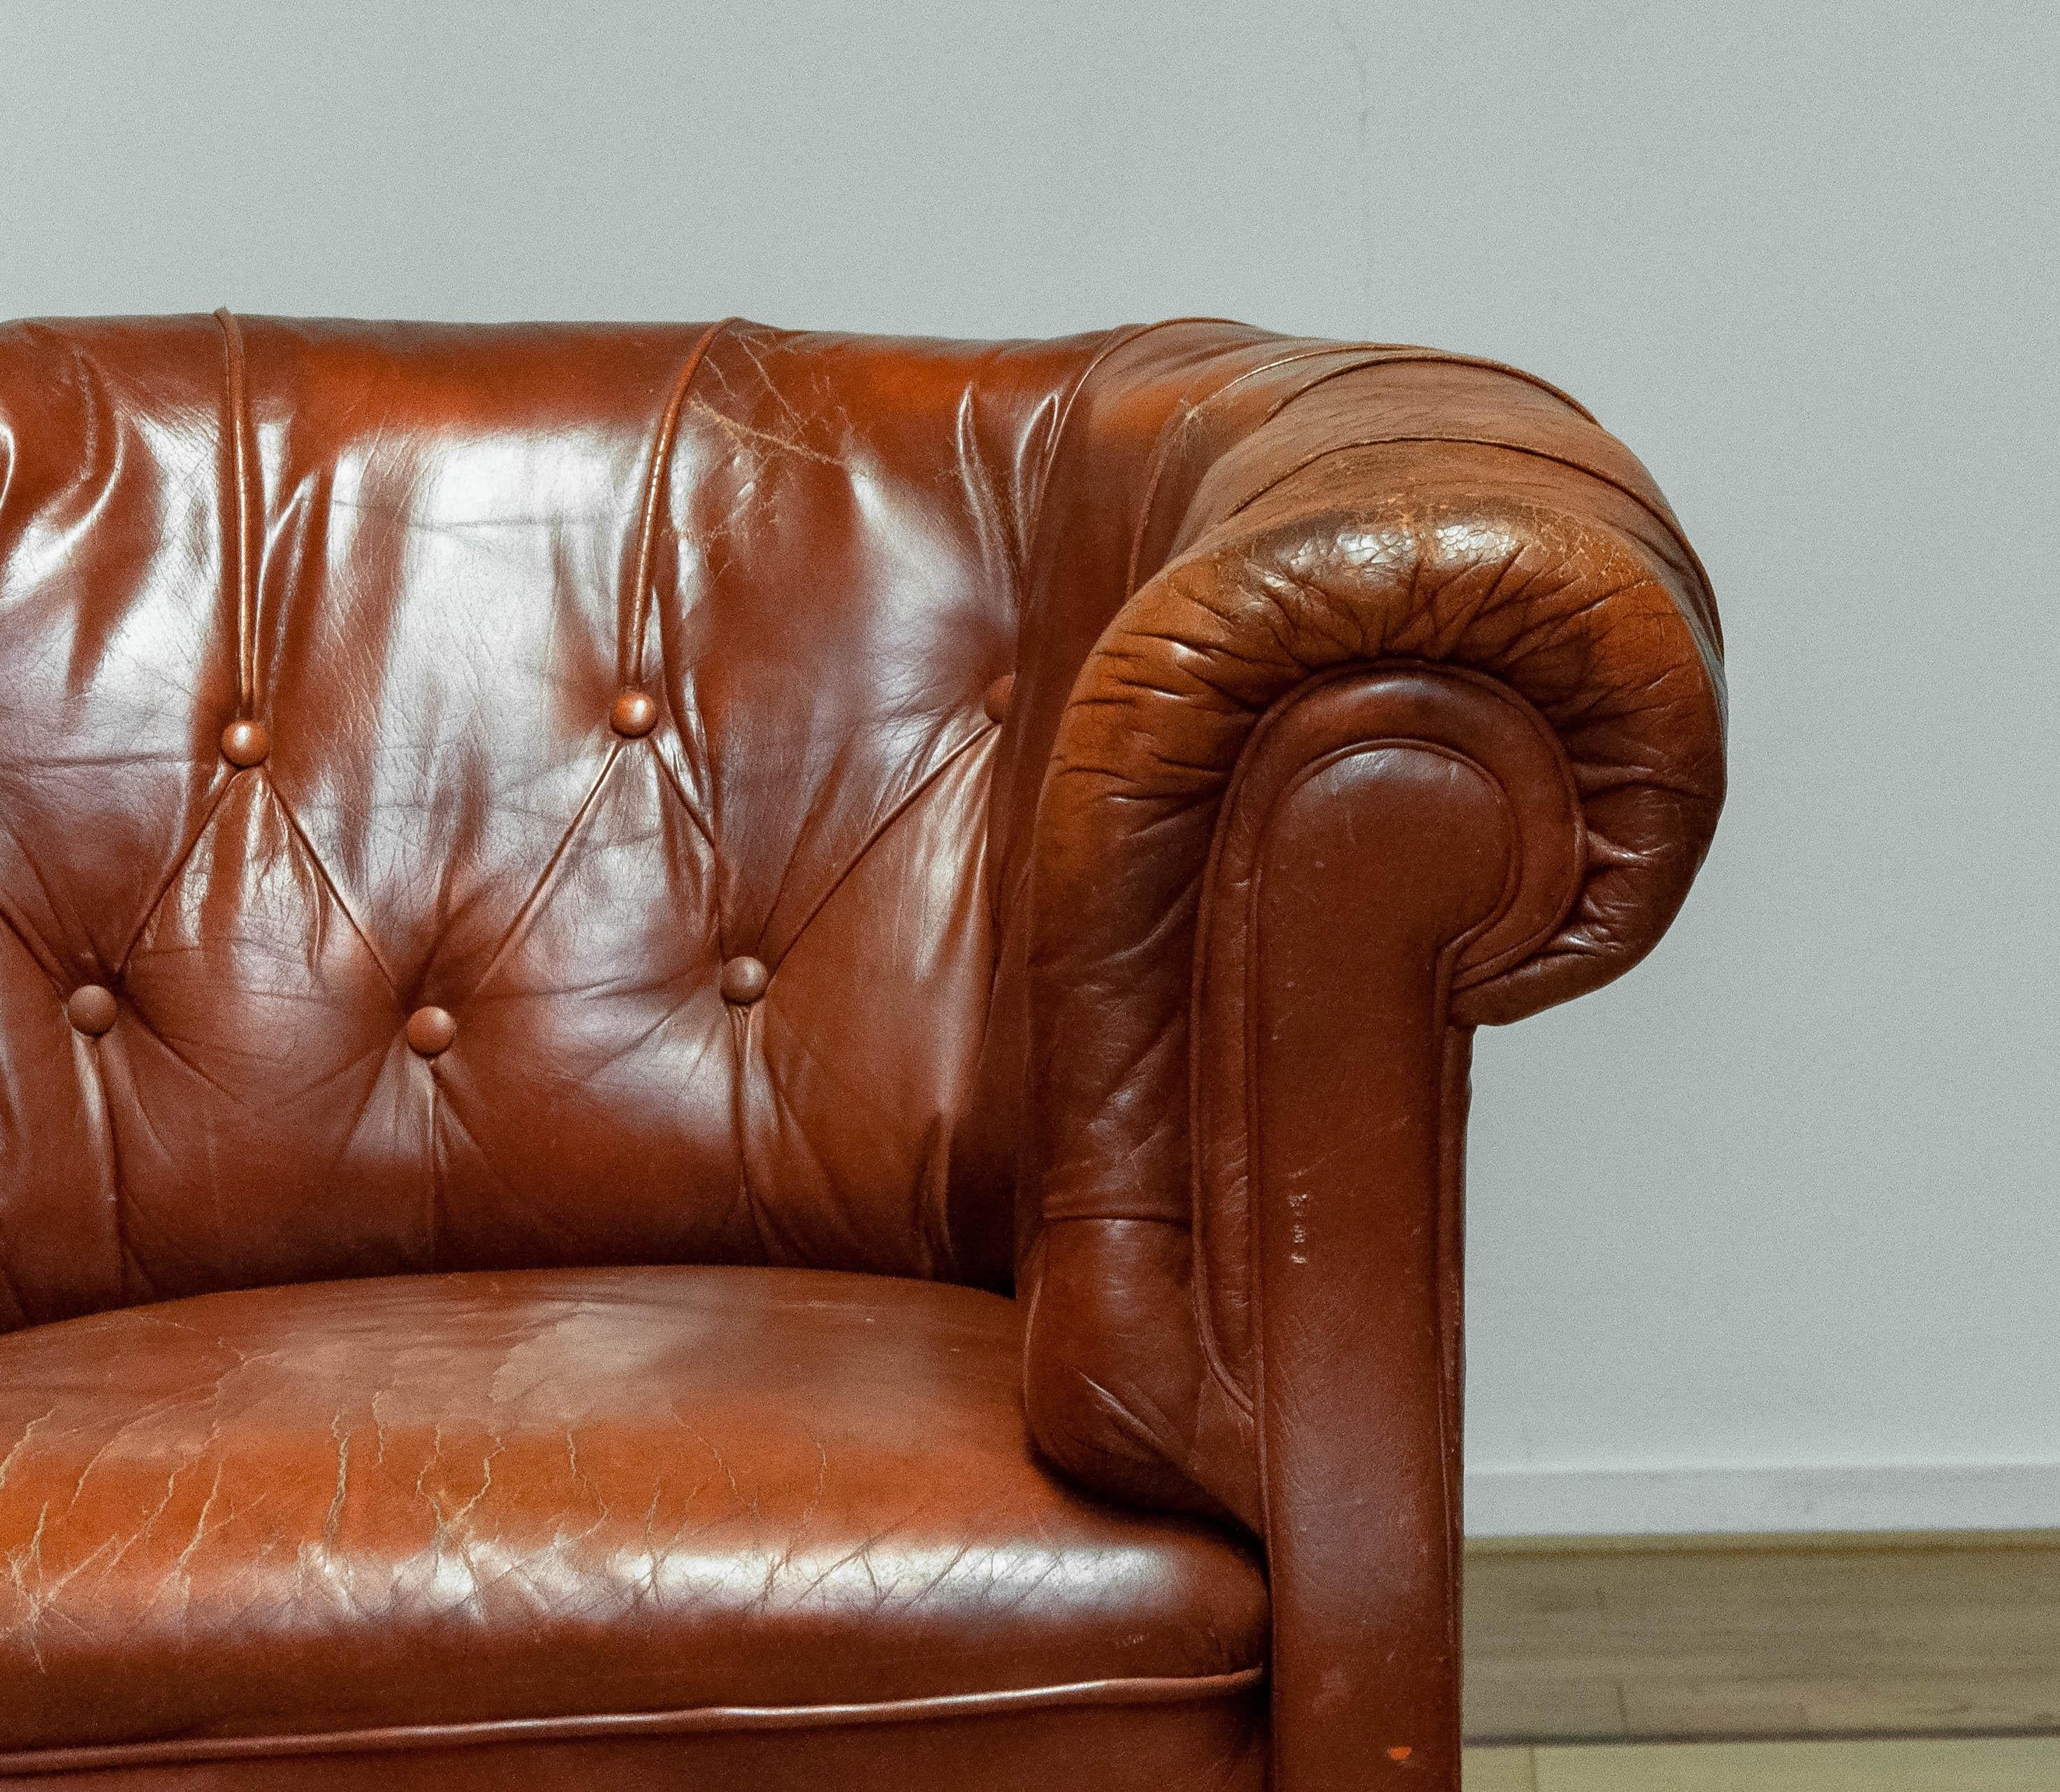 1940s Swedish Tufted Club Chair 'Chesterfield Model' In Tan Brown Worn Leather 10